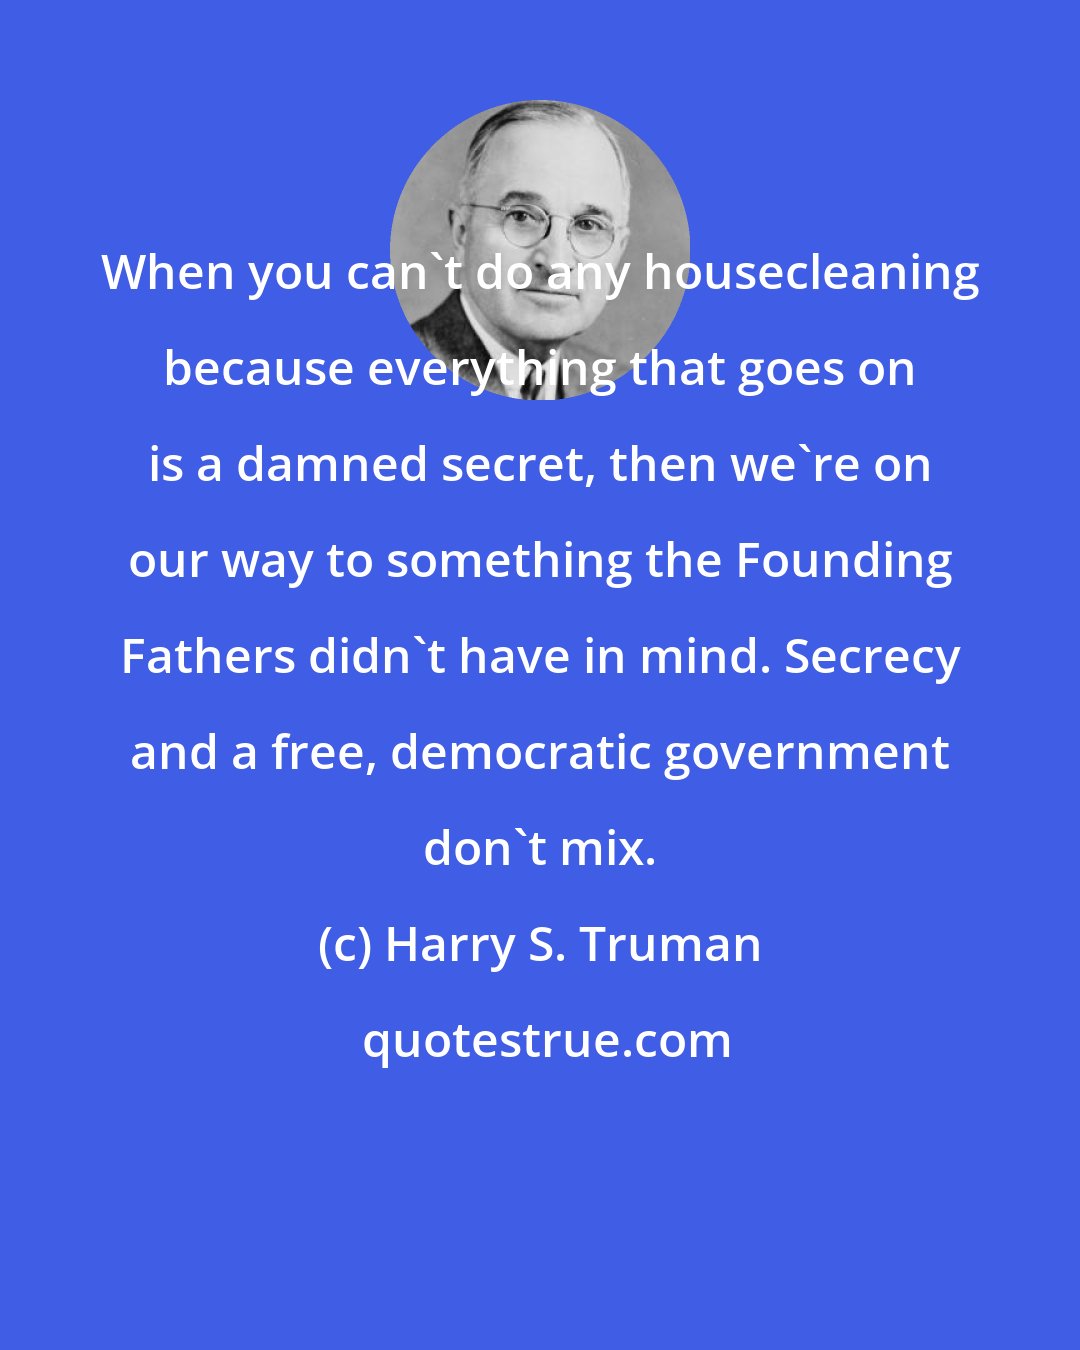 Harry S. Truman: When you can't do any housecleaning because everything that goes on is a damned secret, then we're on our way to something the Founding Fathers didn't have in mind. Secrecy and a free, democratic government don't mix.